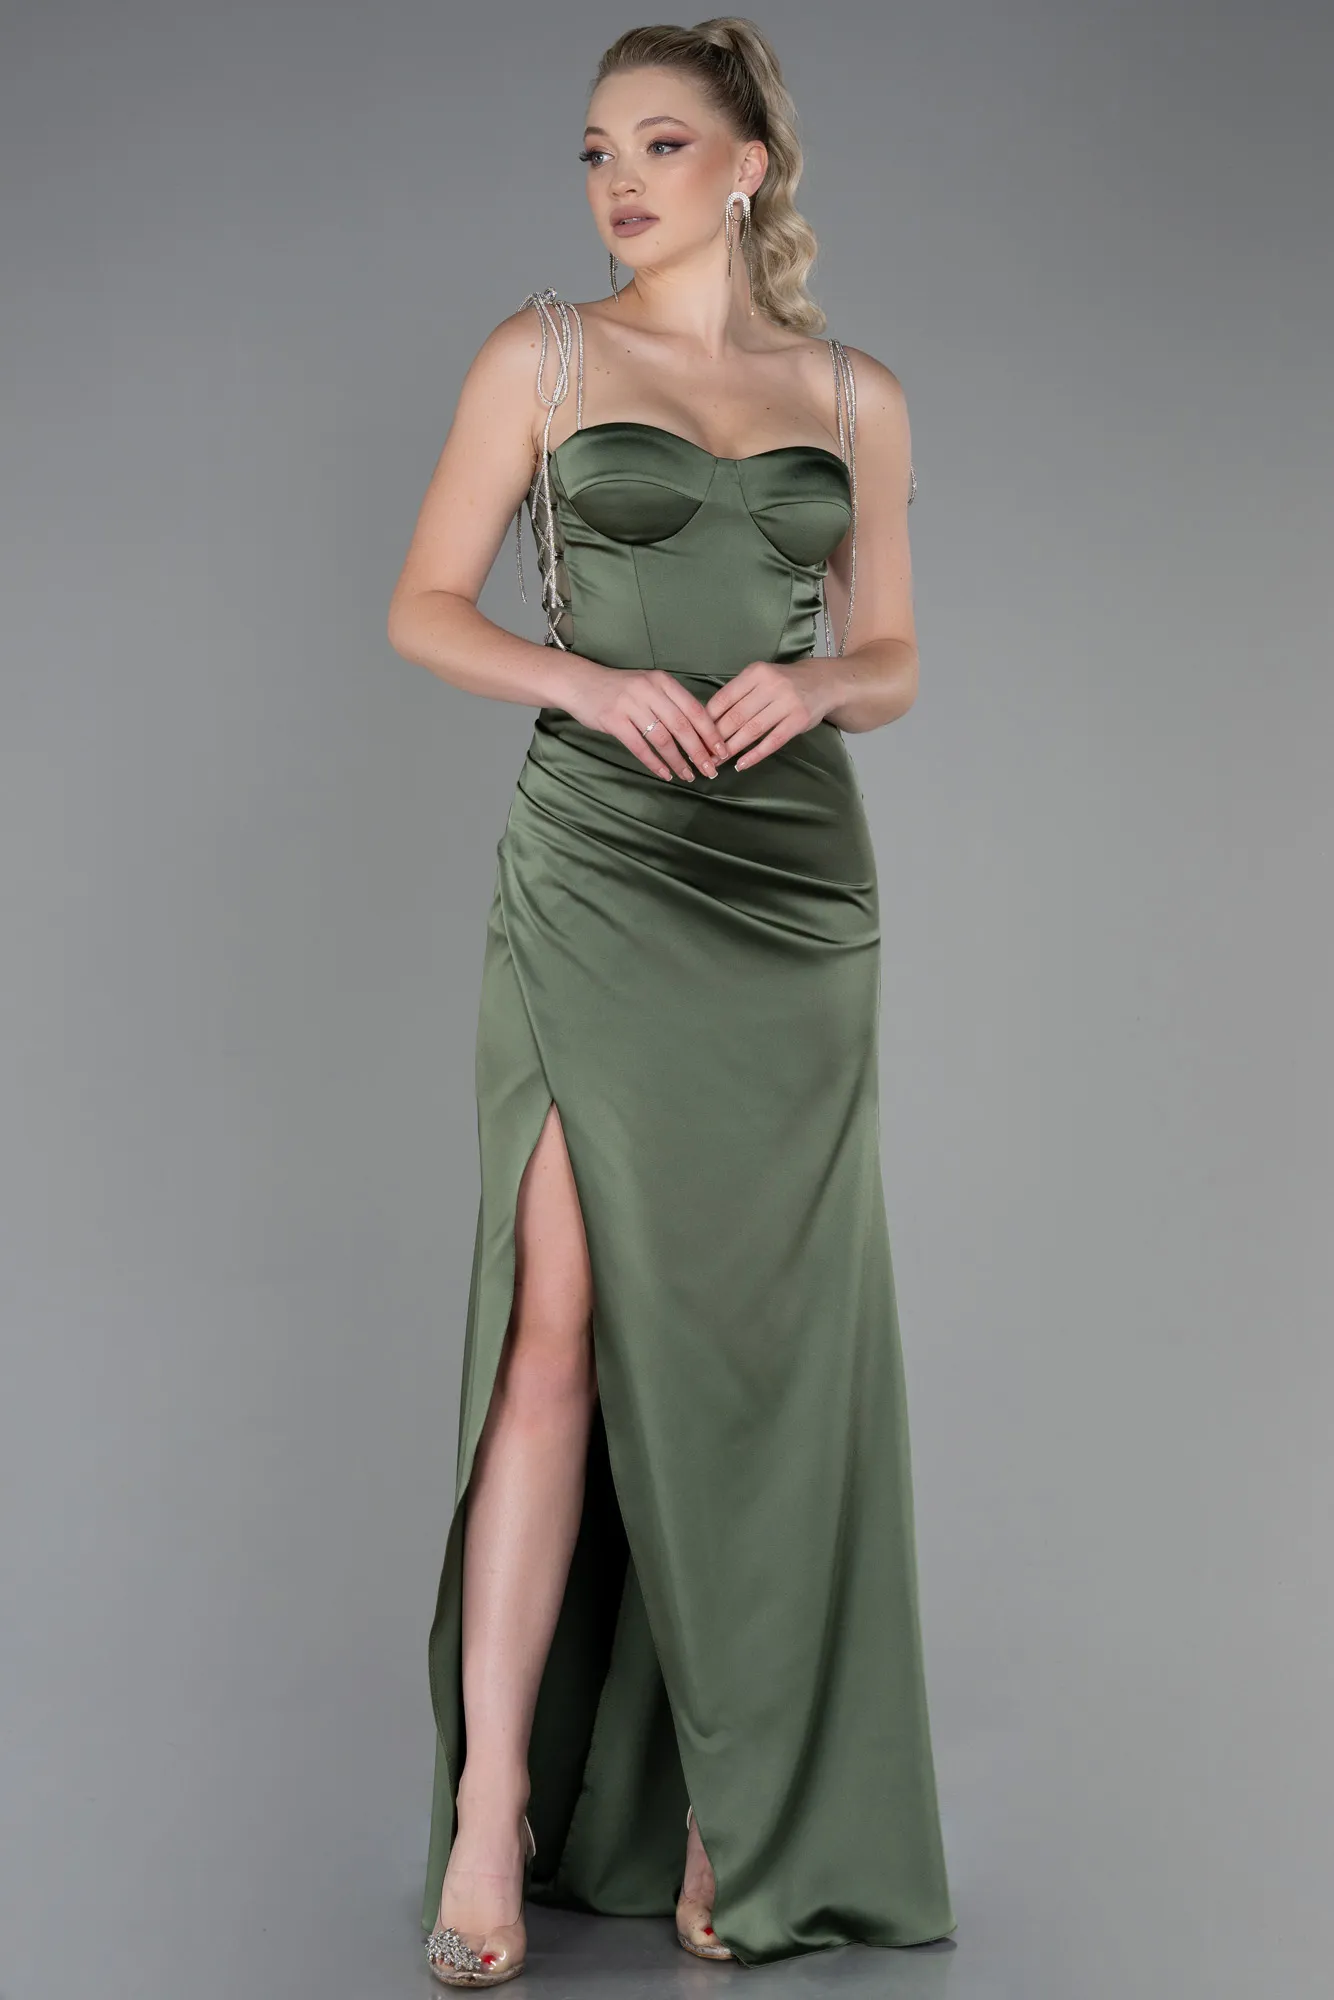 Olive Drab-Long Satin Prom Gown ABU3198